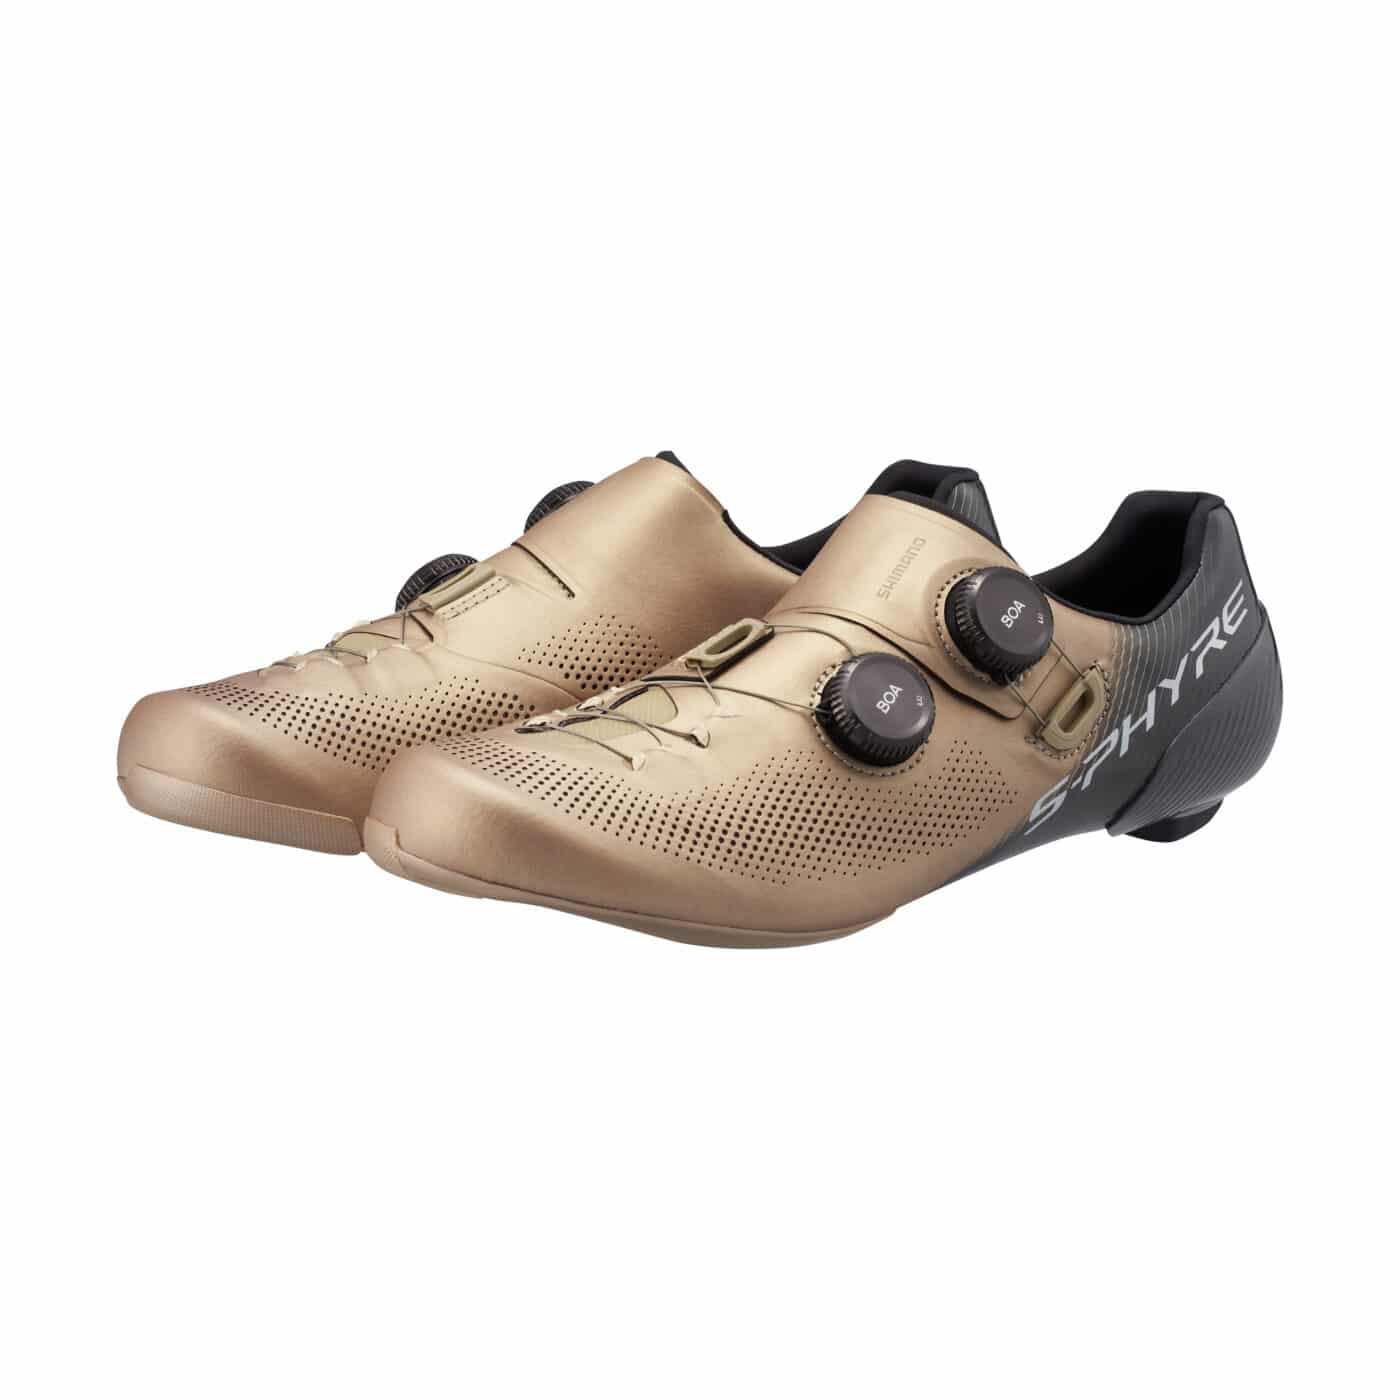 Shimano S-Phyre Champagne chaussures velo